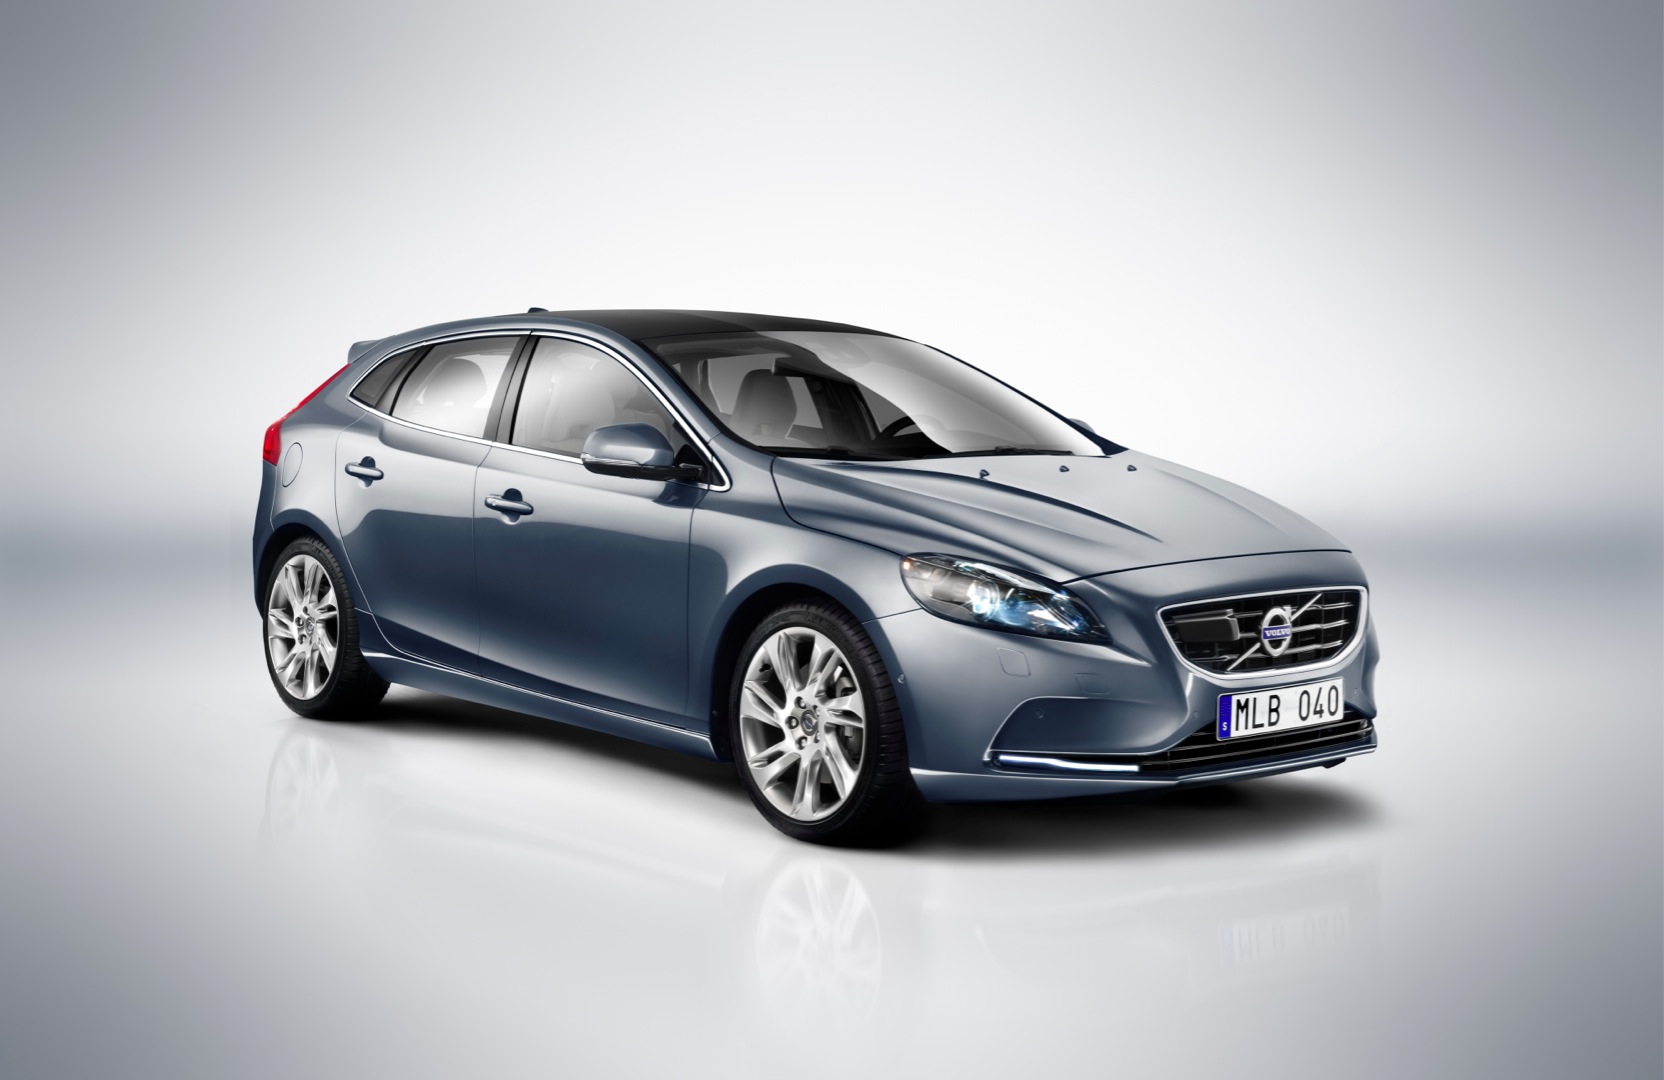 Fichiers Tuning Haute Qualité Volvo V40 / V40 Cross Country 2.0 D3 150hp